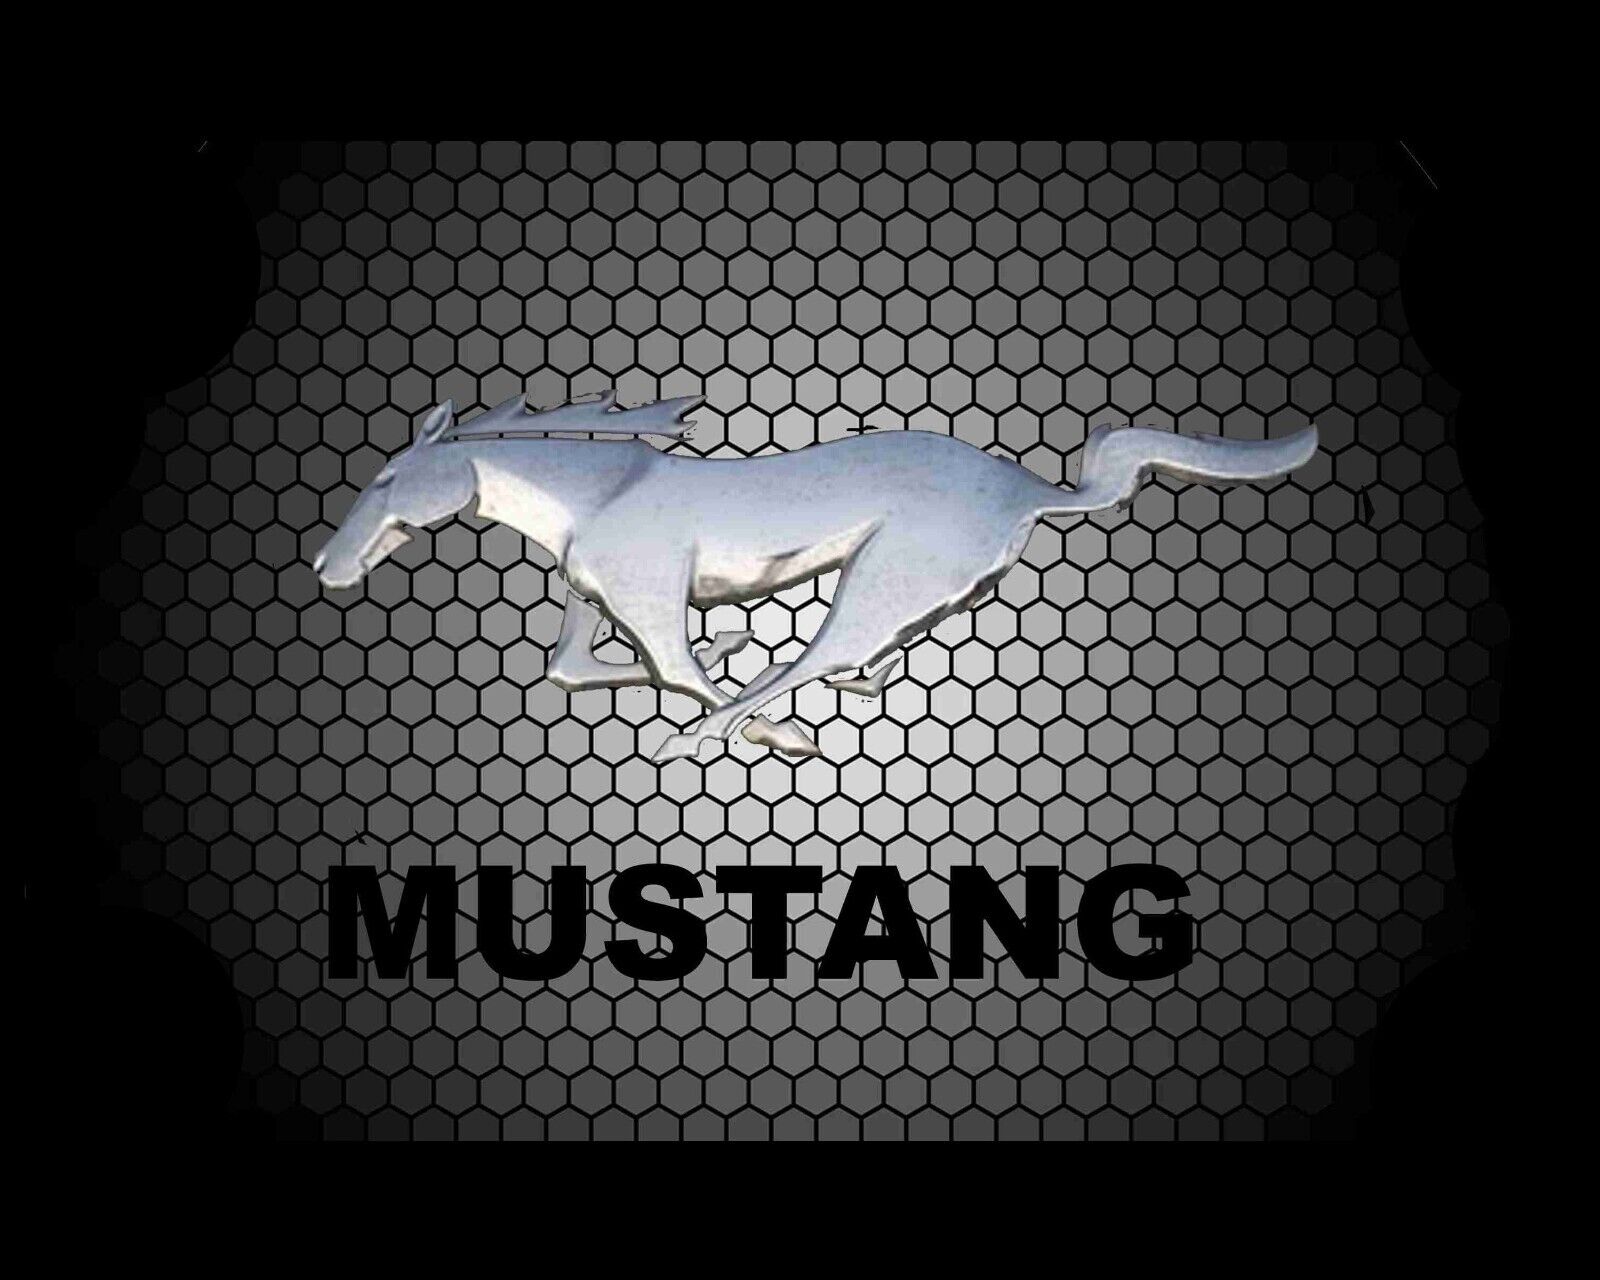 Ford Mustang car Mouse Pad Vintage Classic Old Car Designs Logos 7 3/4 x 9\